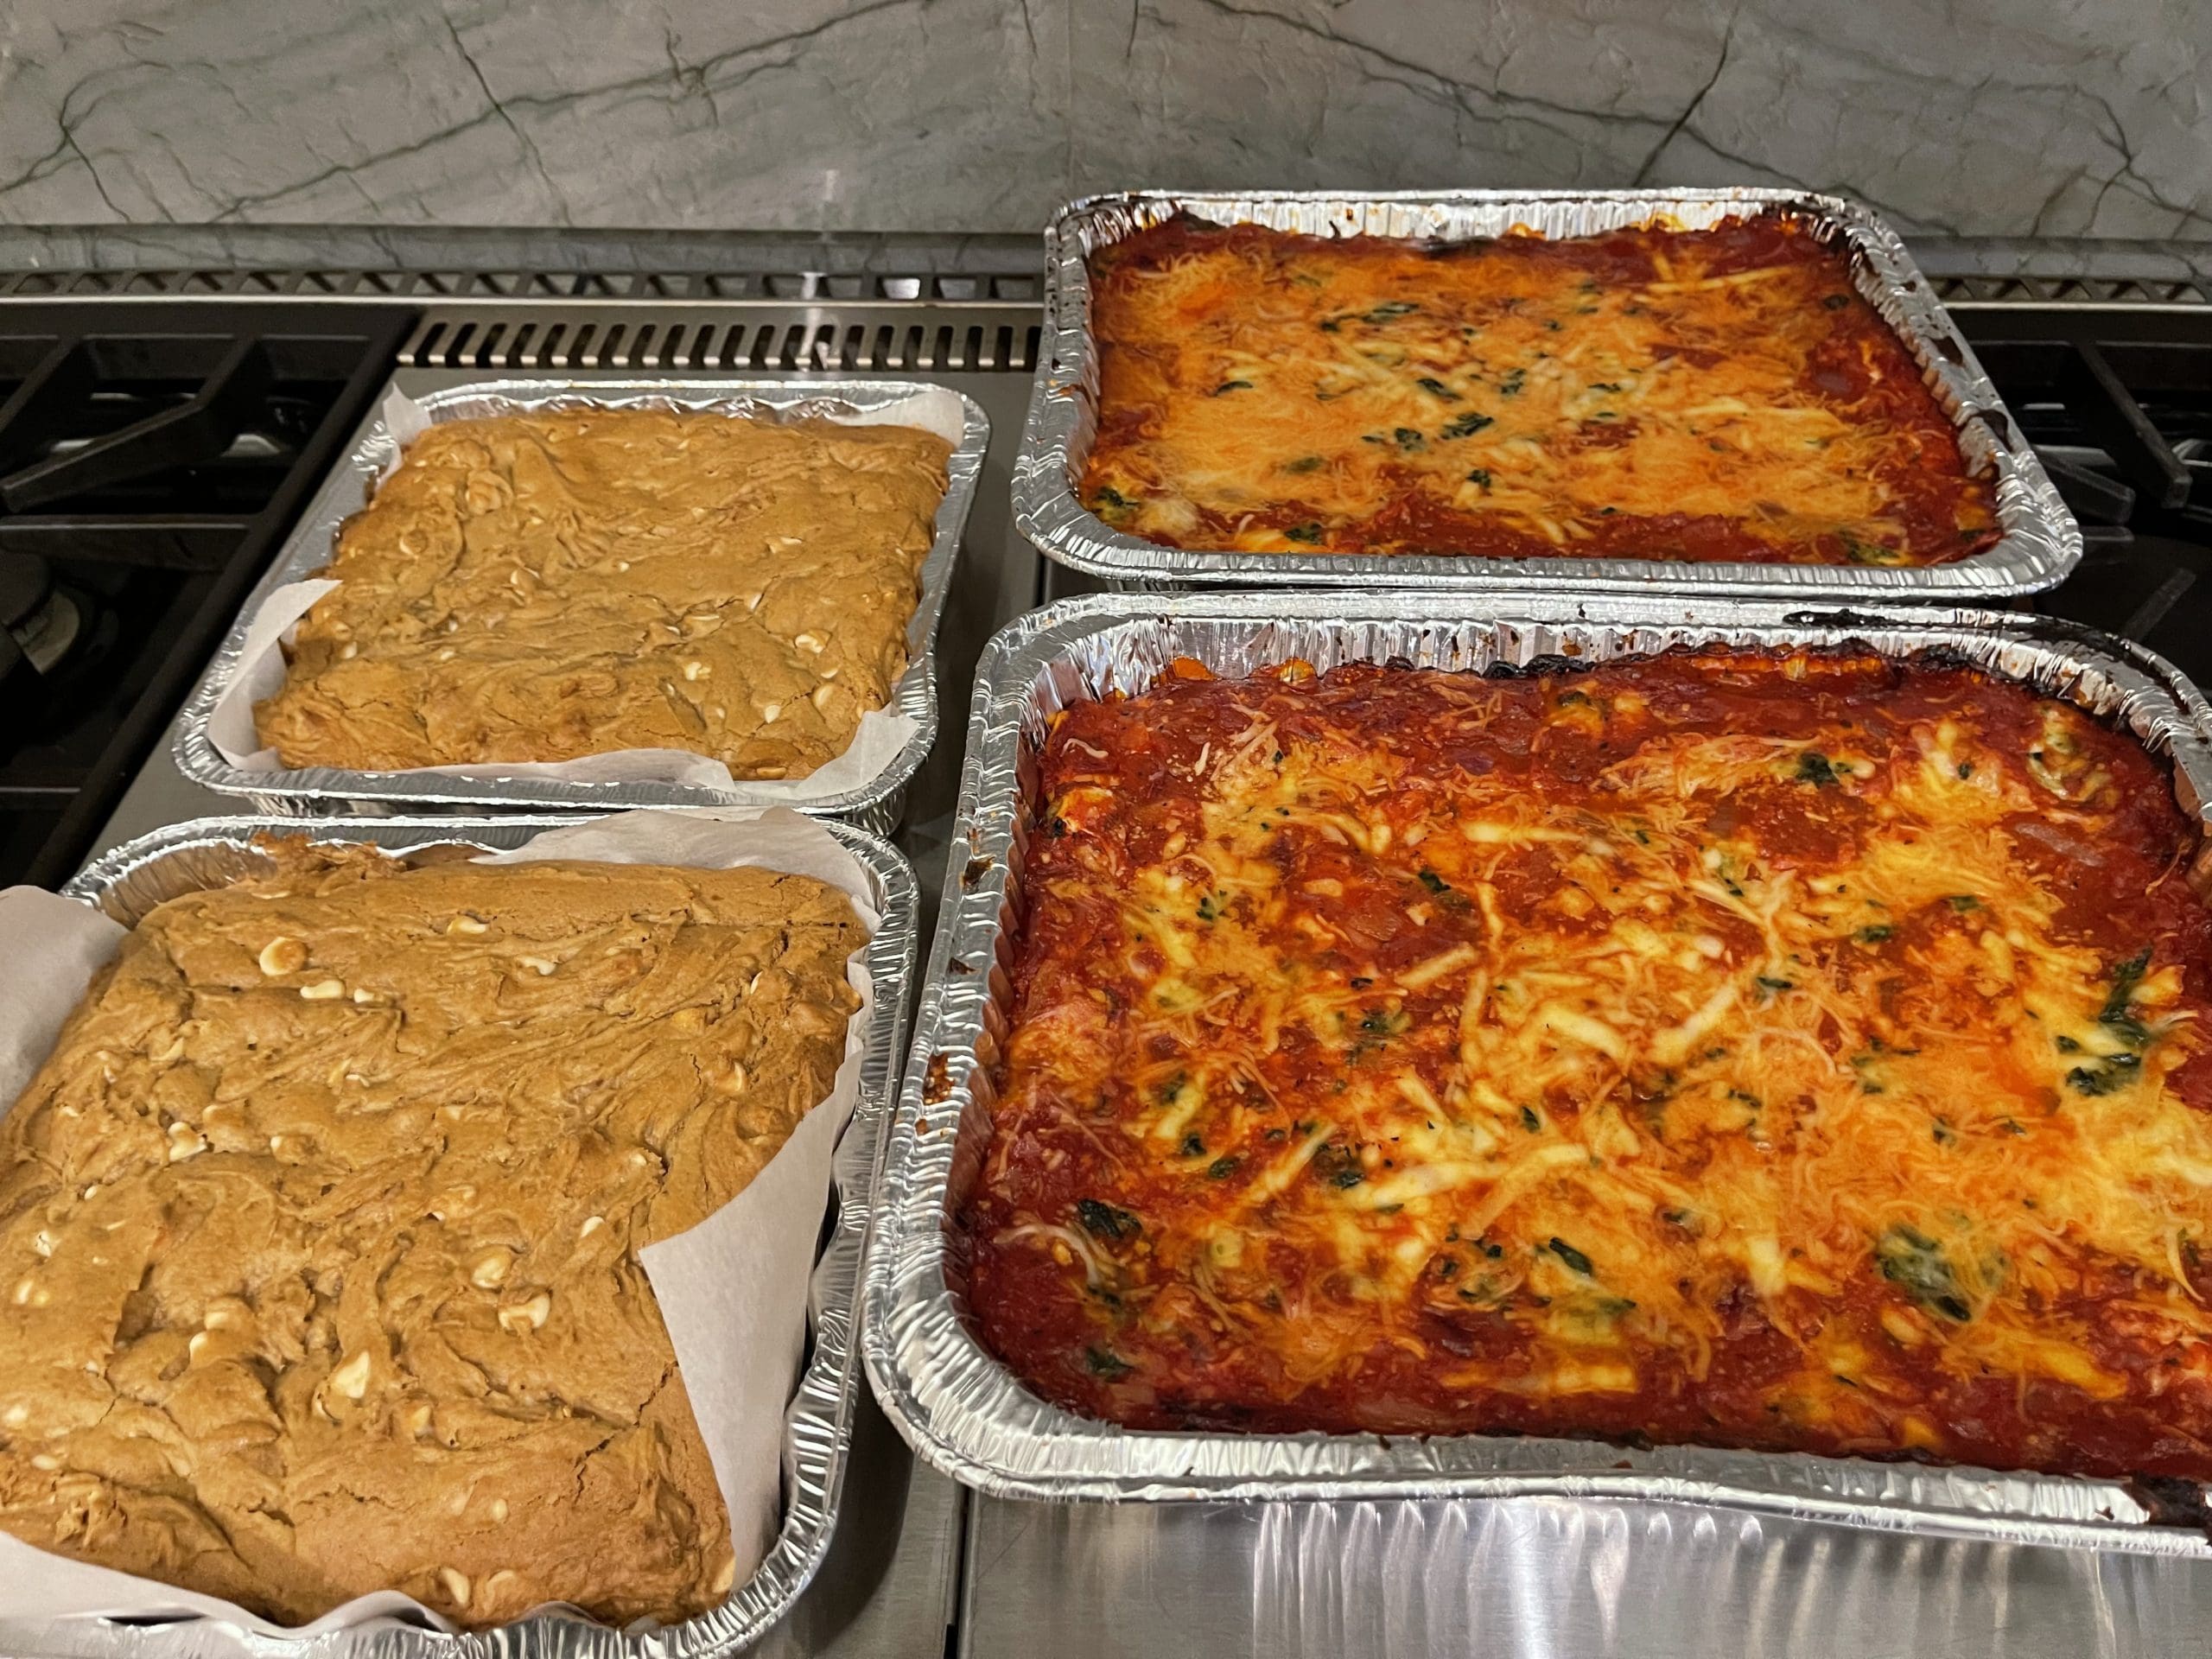 Meals prepared by Main Street members for Stepping Stones Shelter